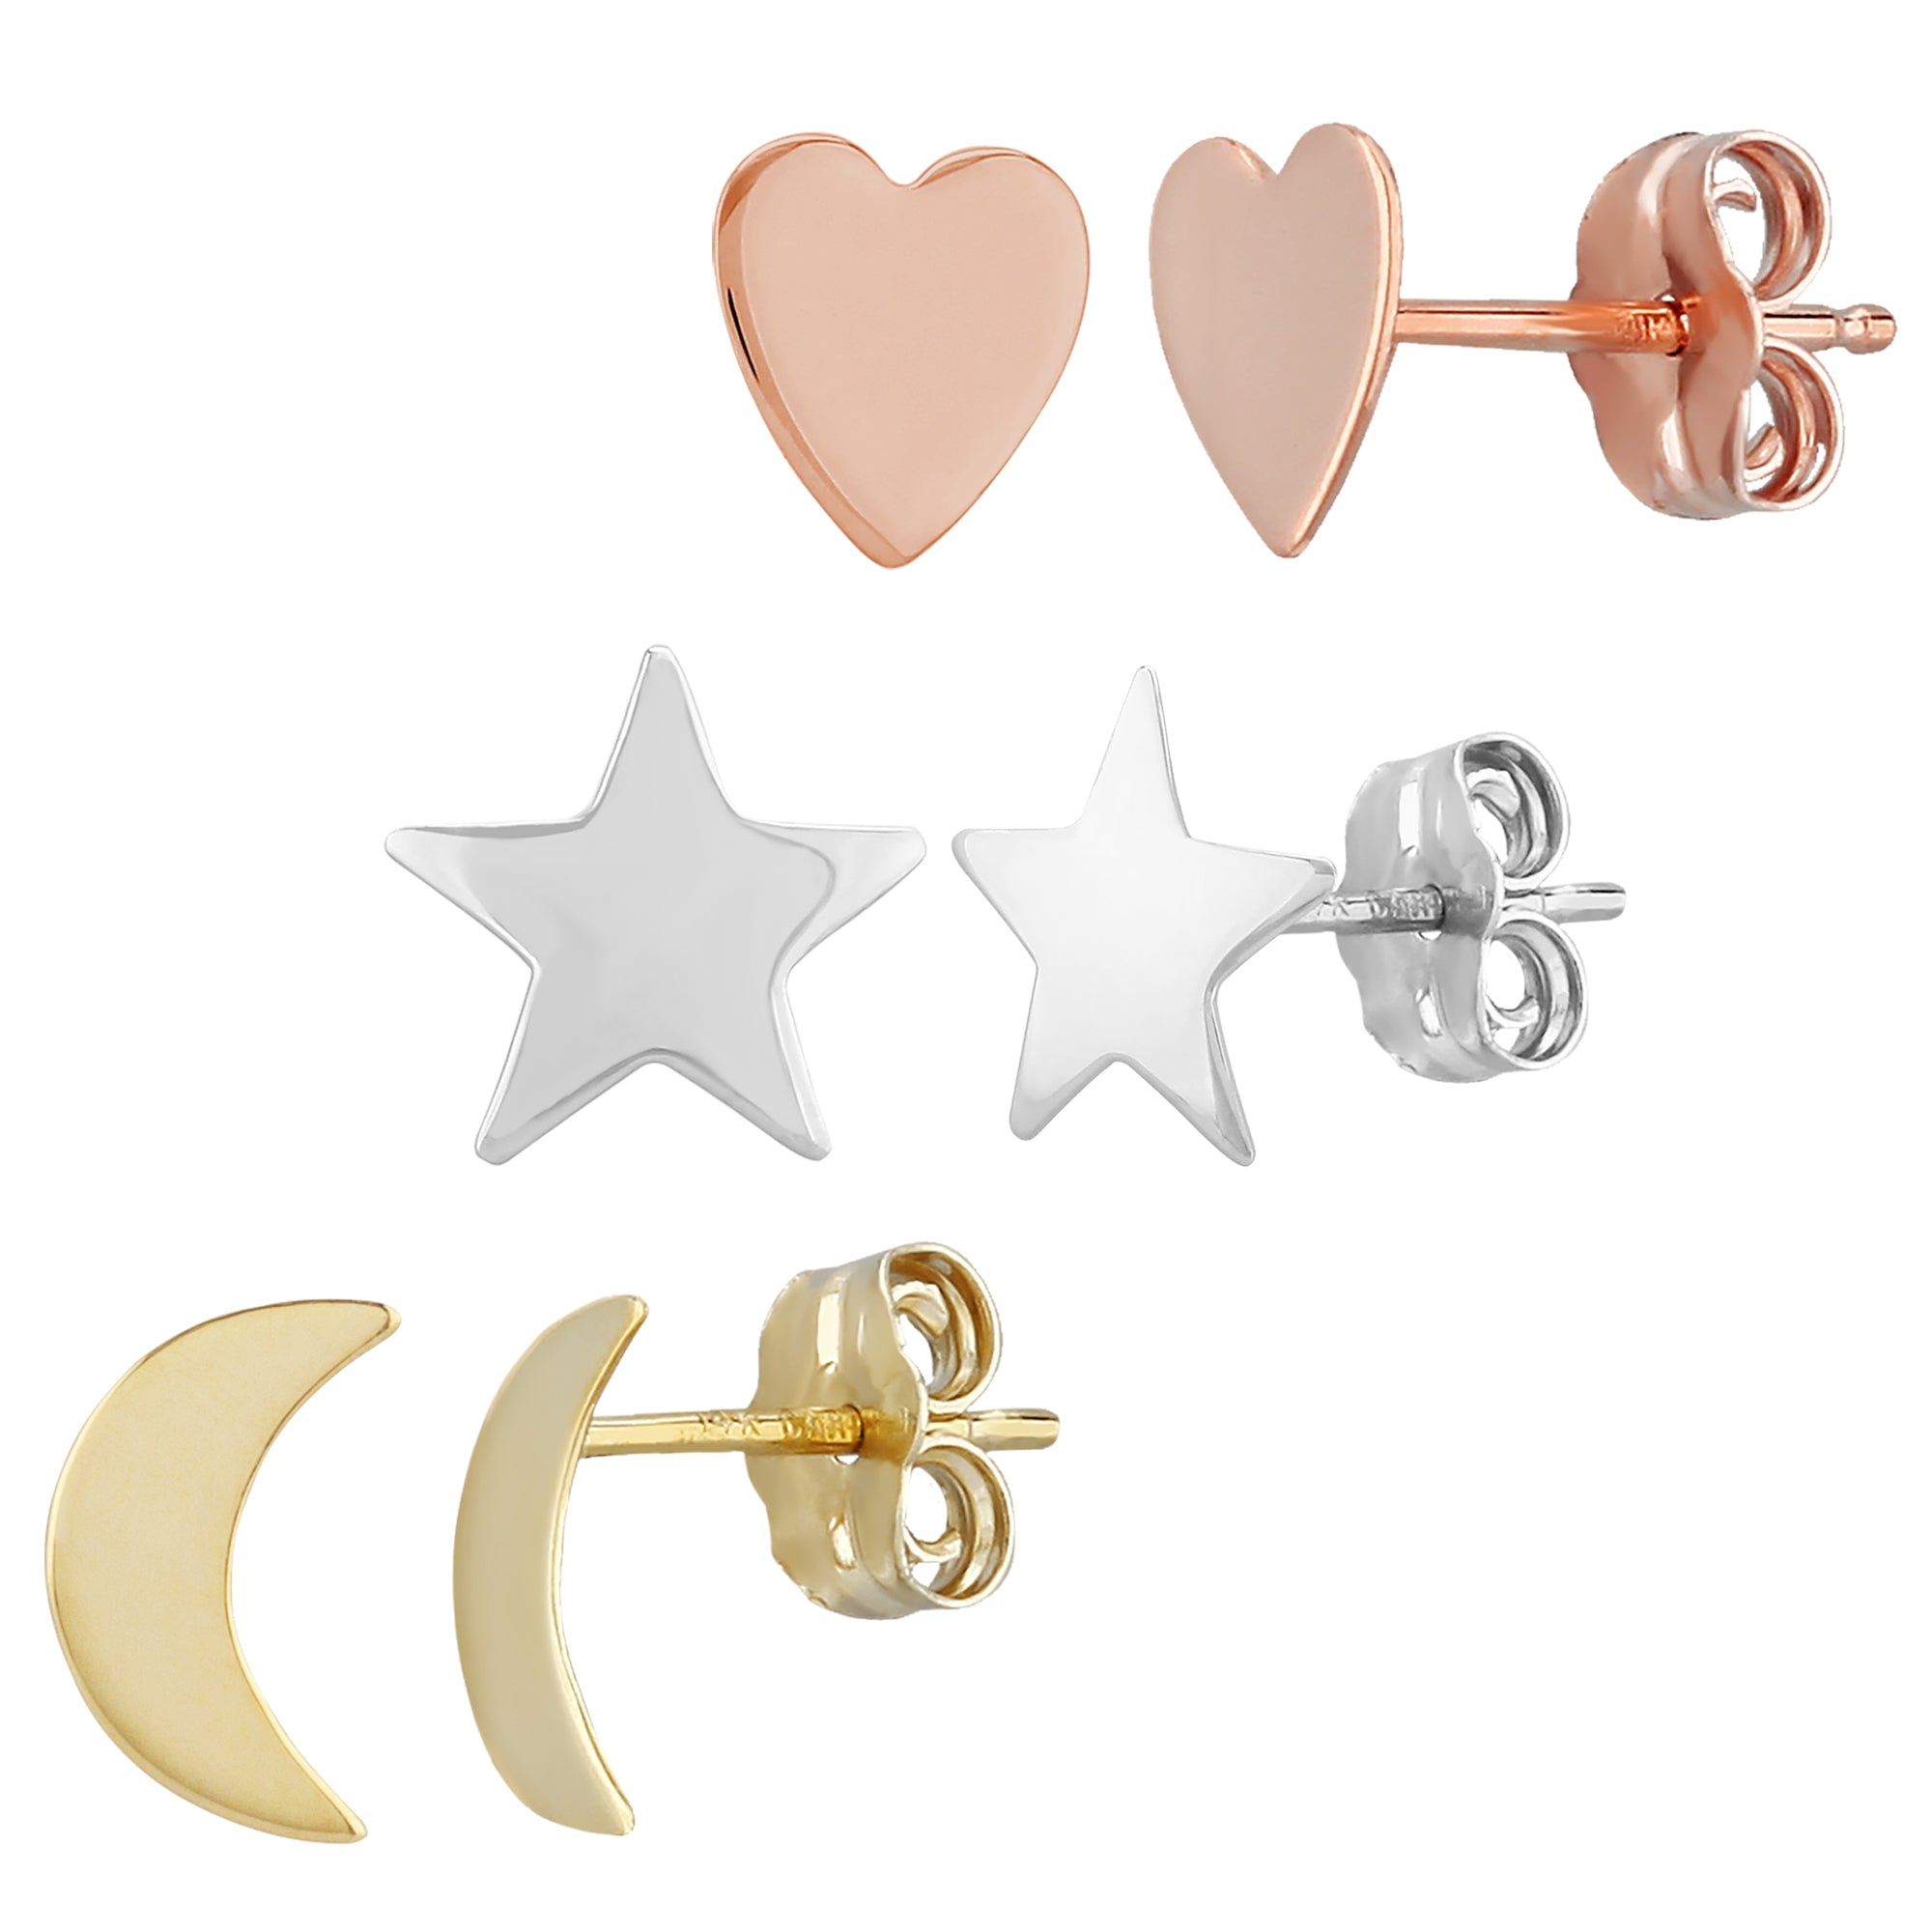 14k White, Yellow, and Rose Gold Heart, Moon, Star Stud Earring Collection